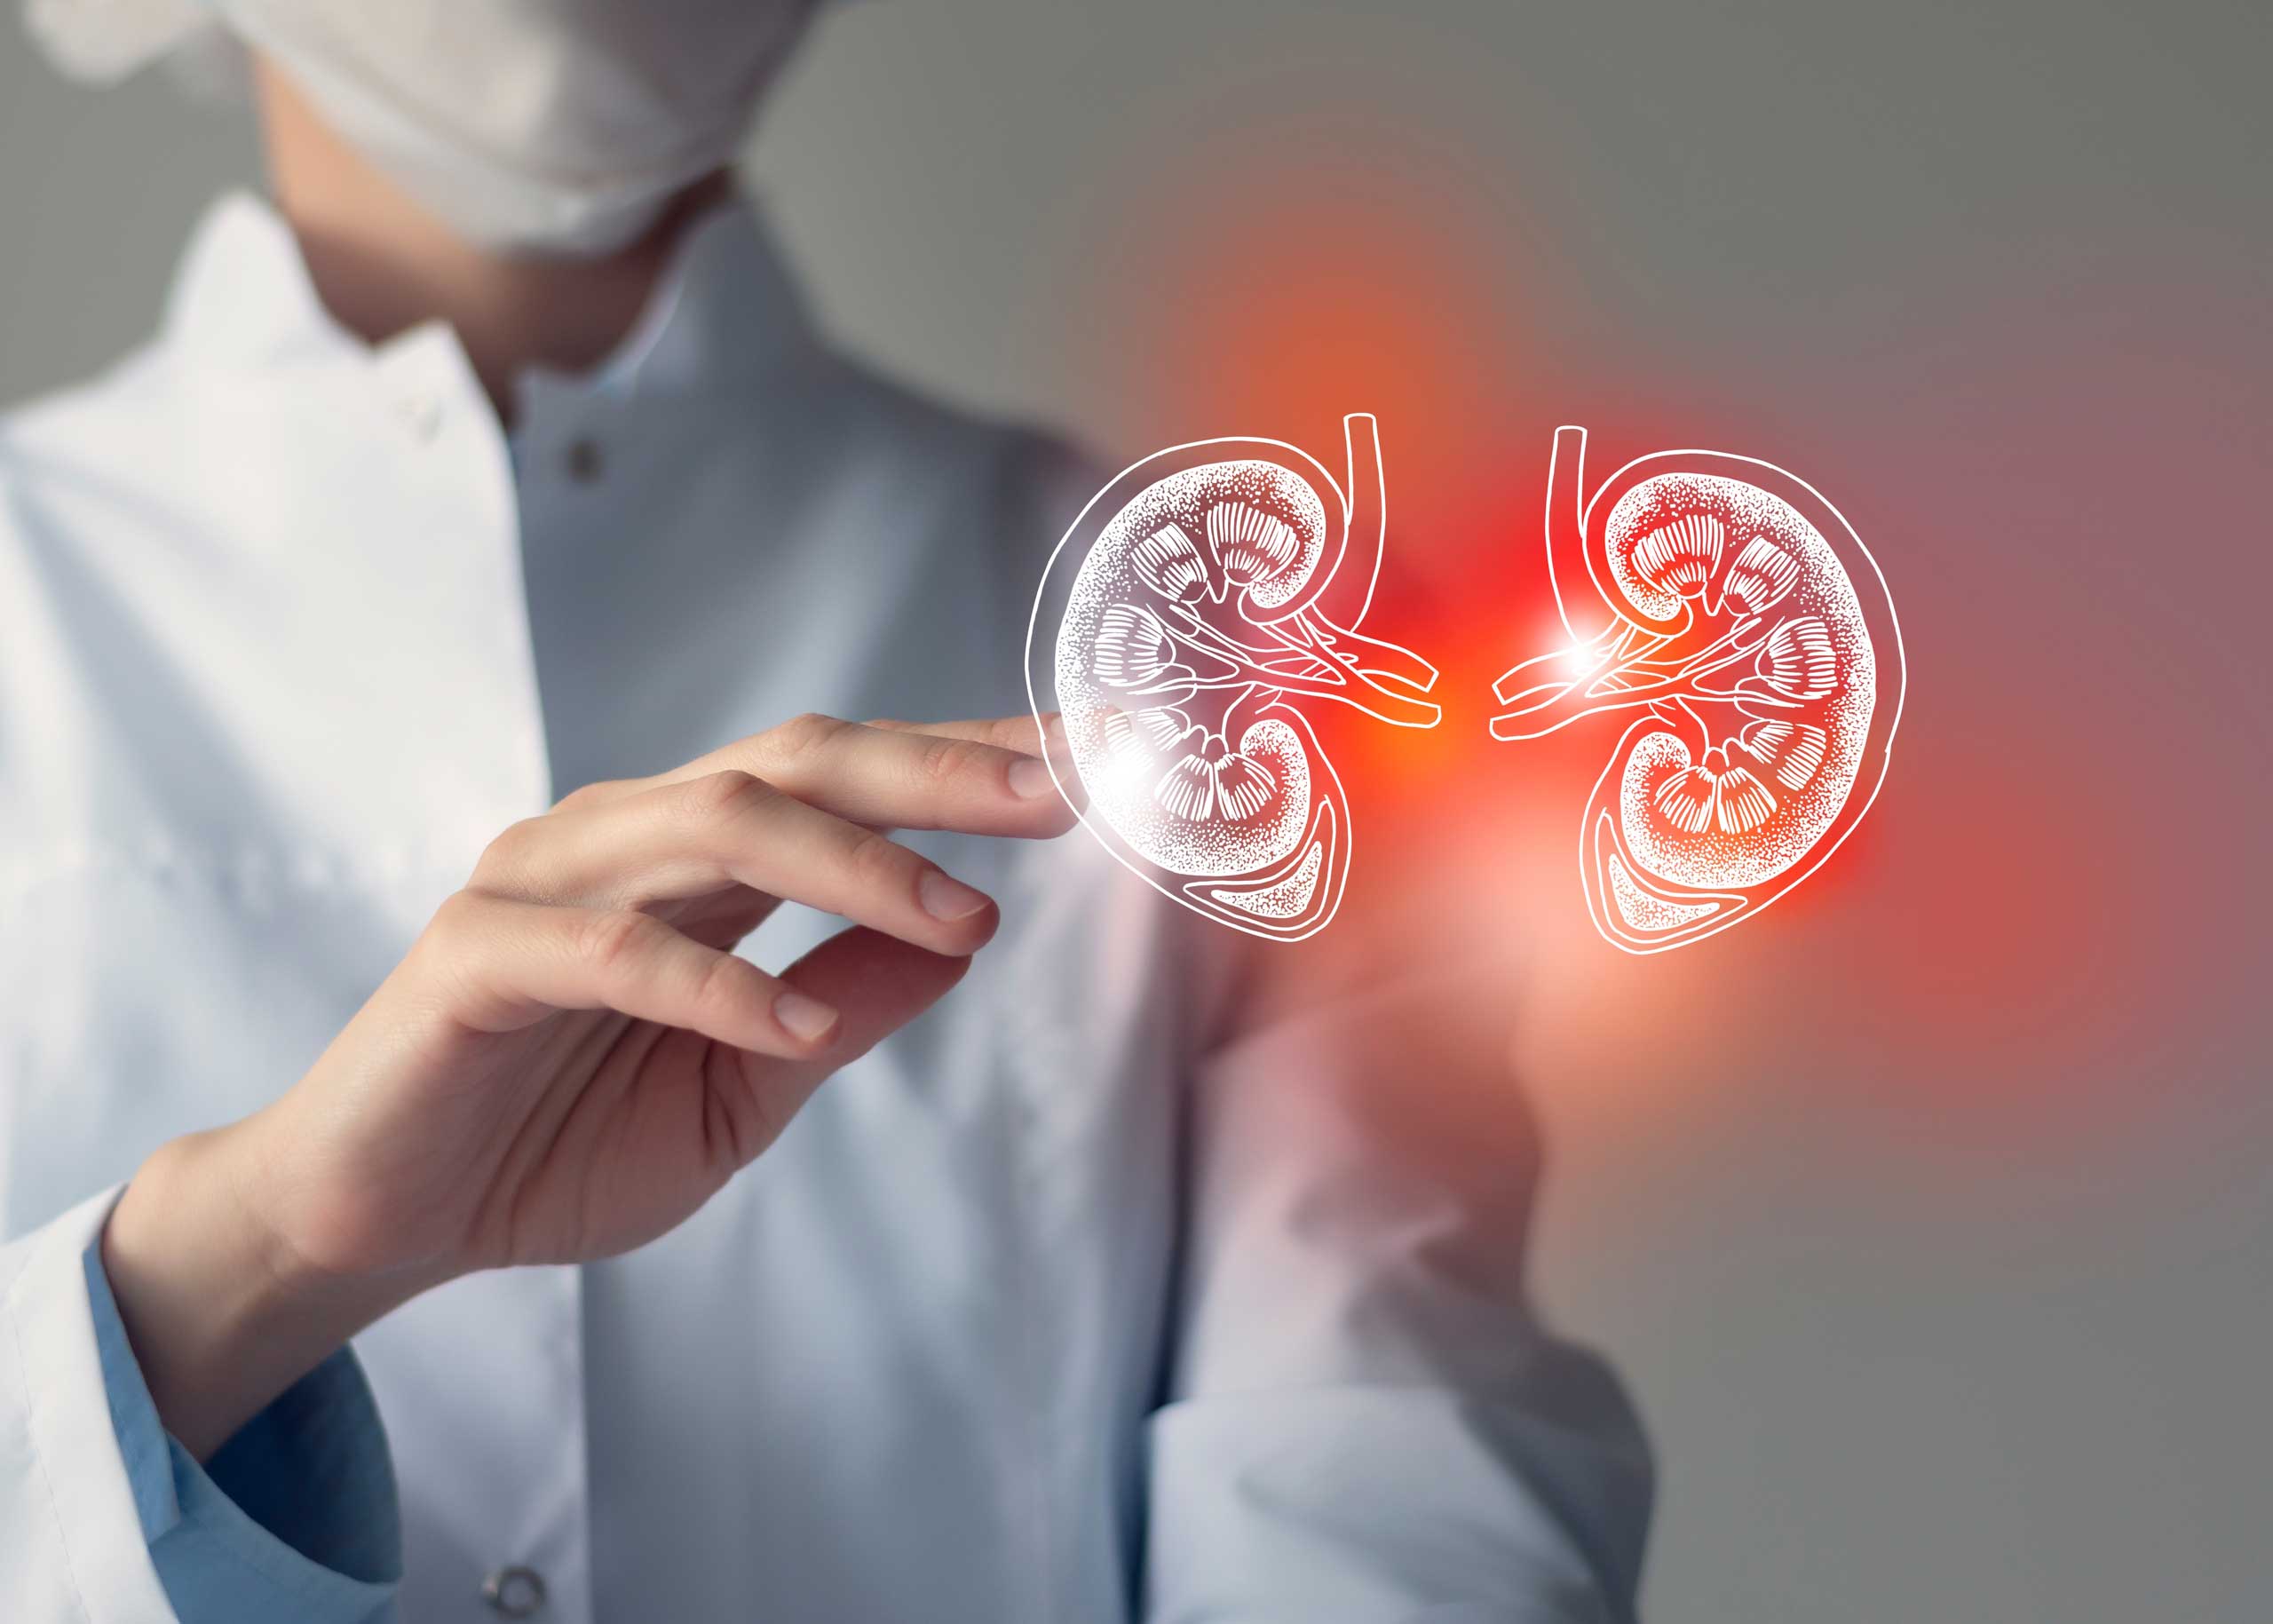 Preventing and Treating Pyelonephritis (Kidney Infection) Effectively